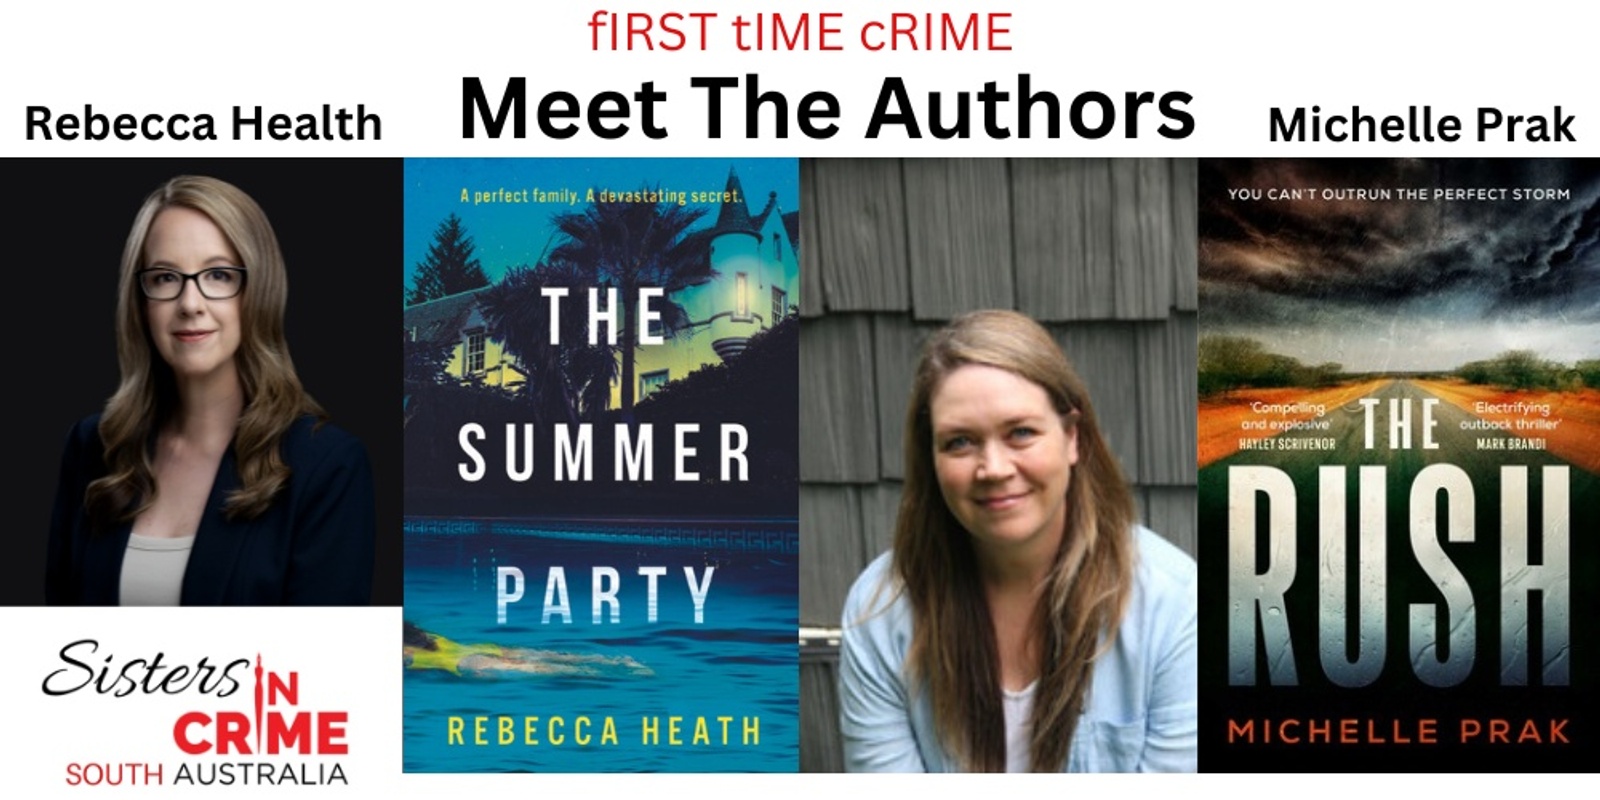 Banner image for First Time Crime - Meet the Authors Rebecca Heath and Michelle Prak